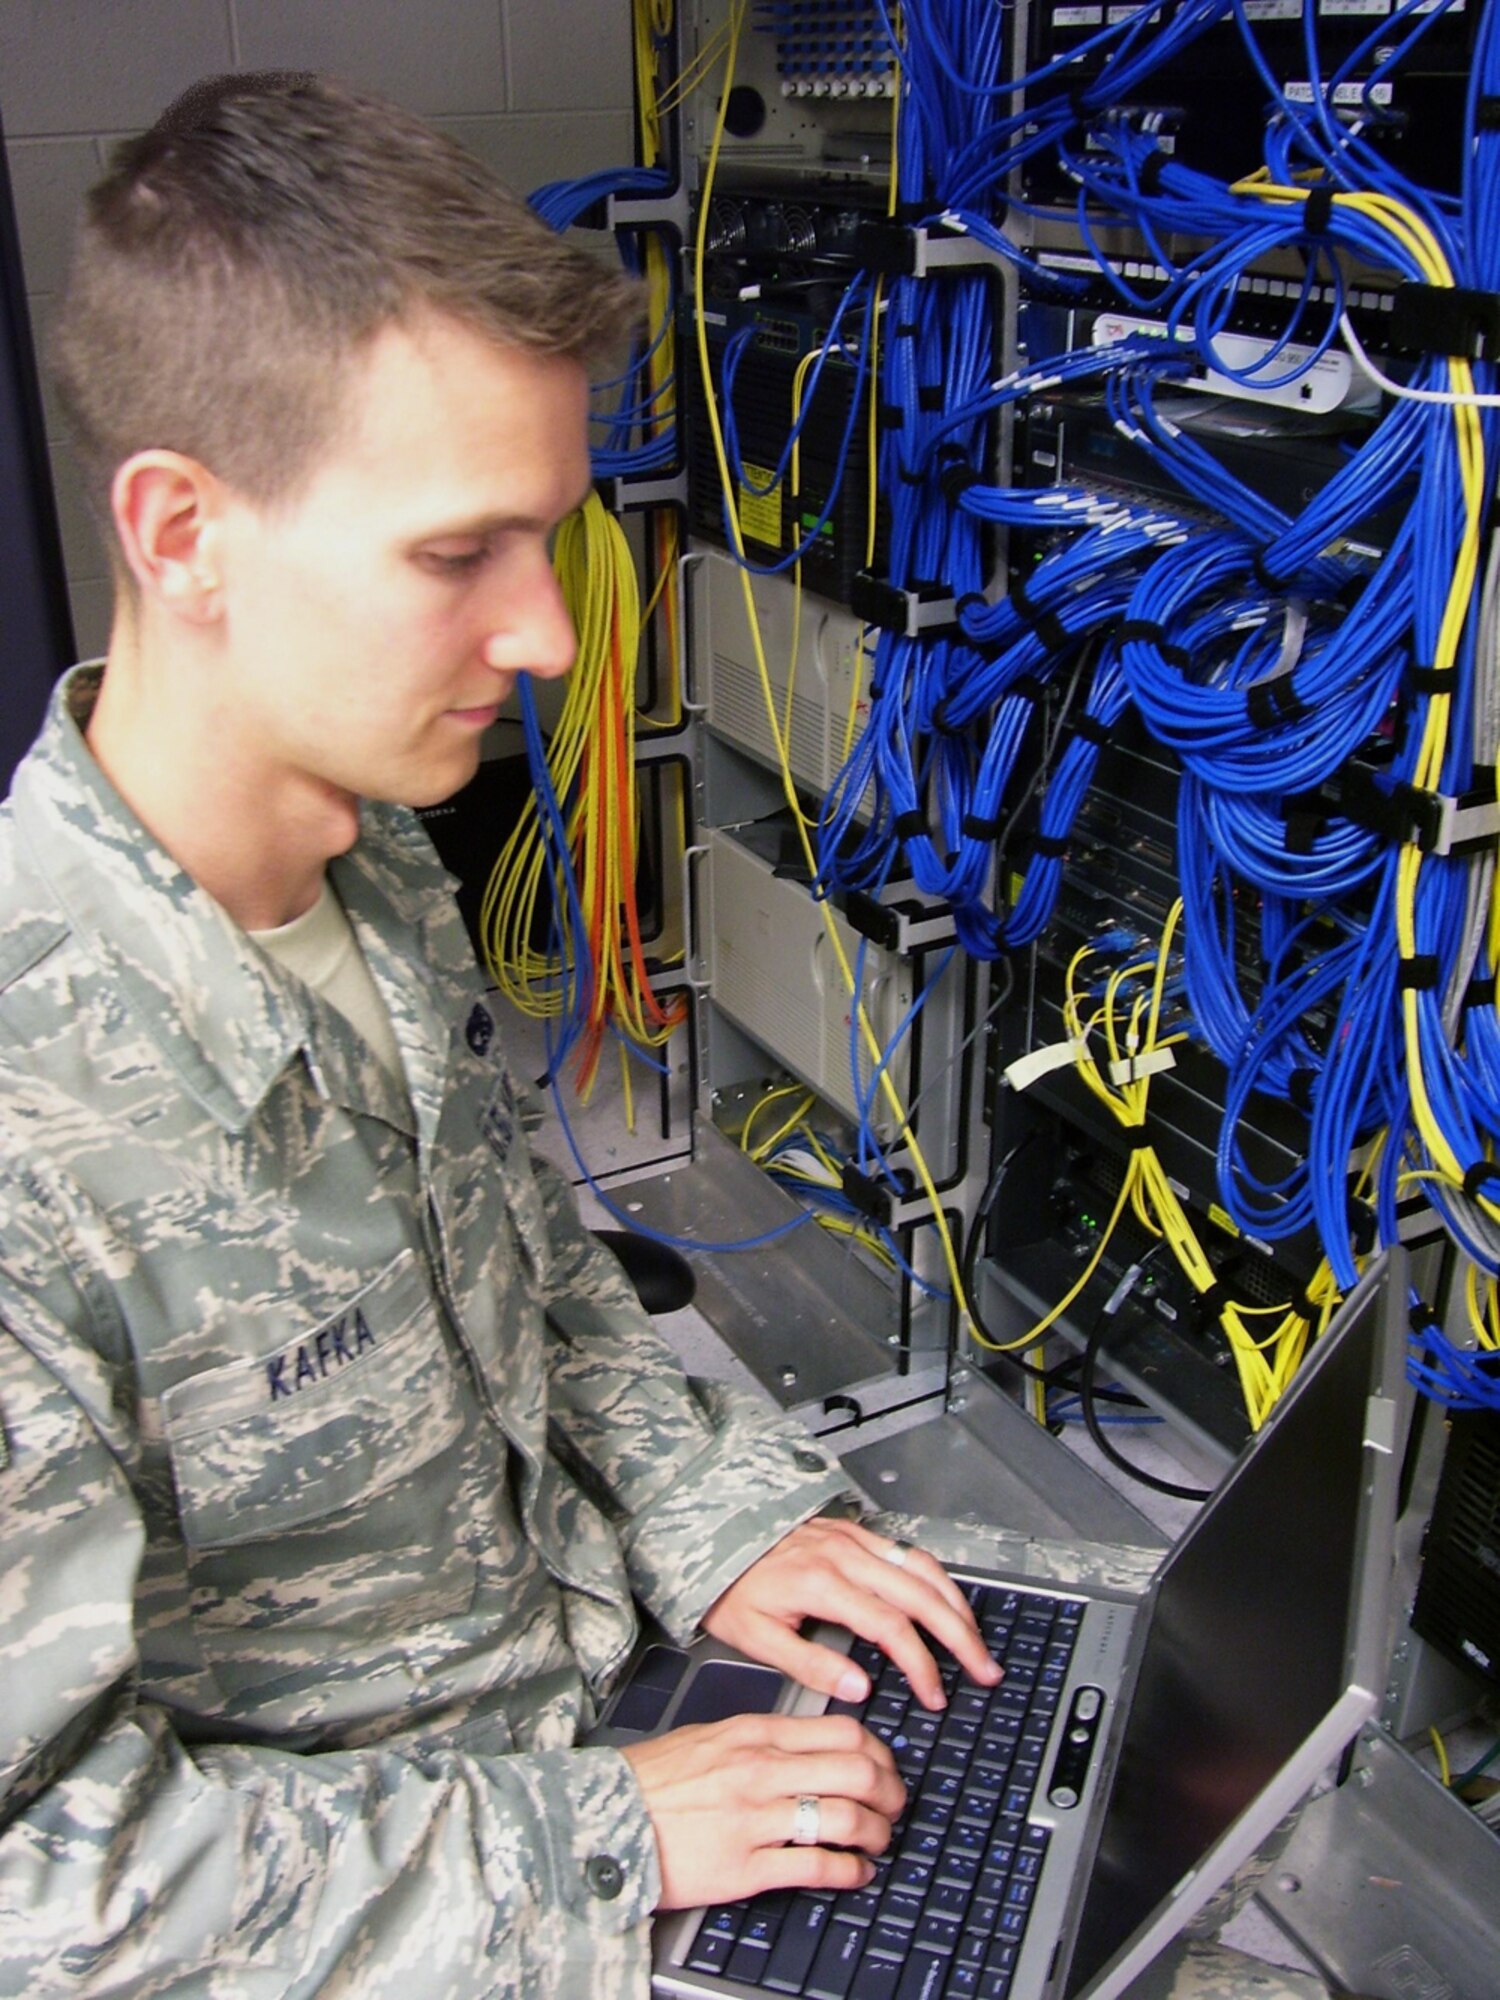 BUCKLEY AIR FORCE BASE, Colo. -- Airman 1st Class Robert Kafka, 460th Space Communications Squadron, configures a router. Airman Kafka is the Warrior of the Week for July 25 - 31. (Courtesy photo)